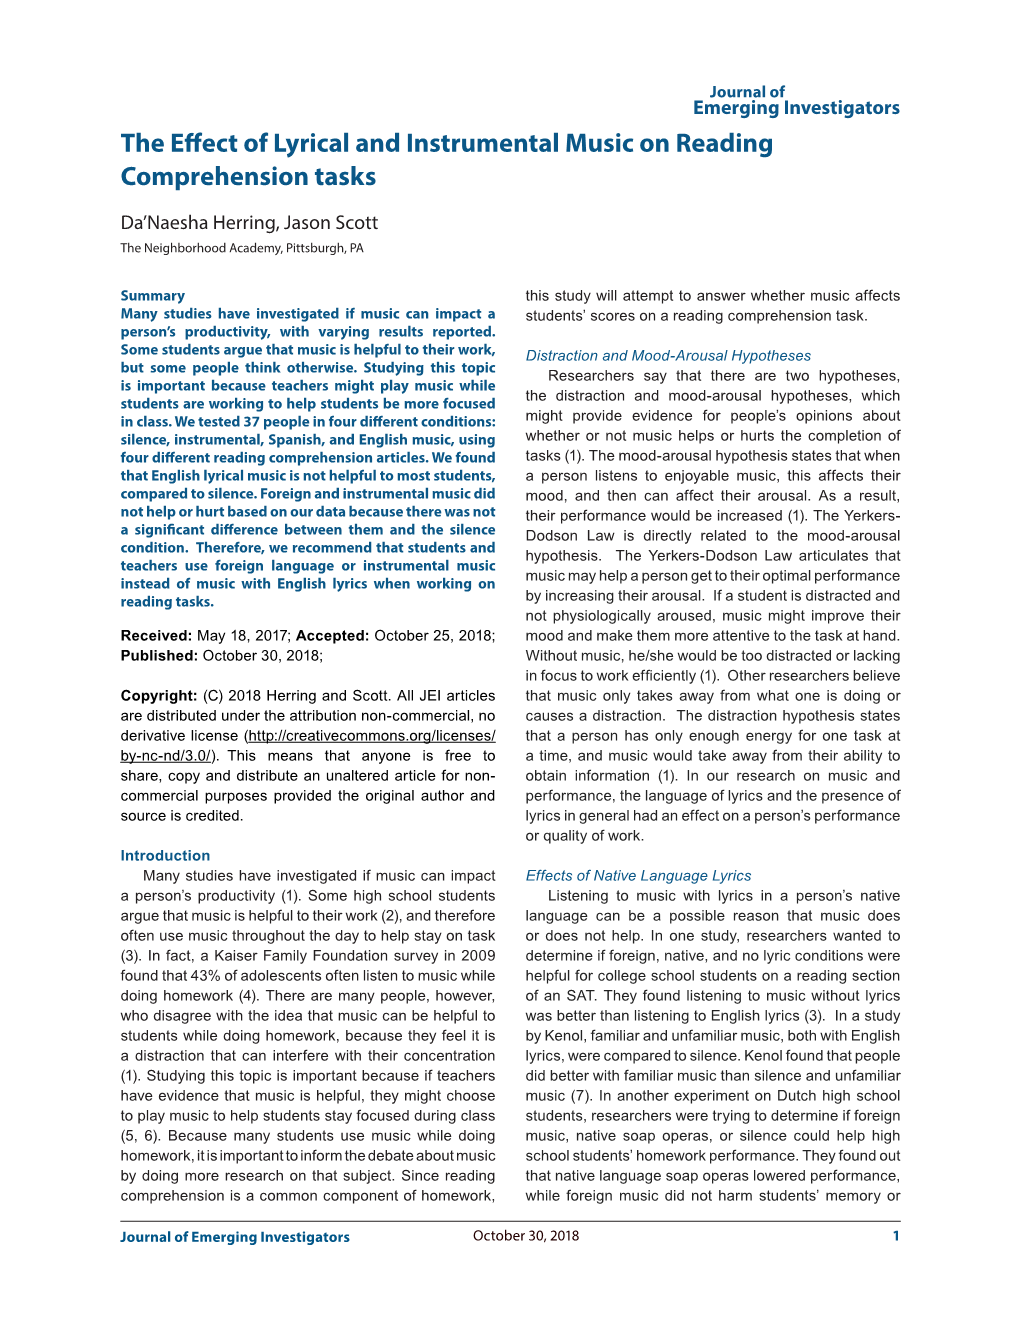 The Effect of Lyrical and Instrumental Music on Reading Comprehension Tasks